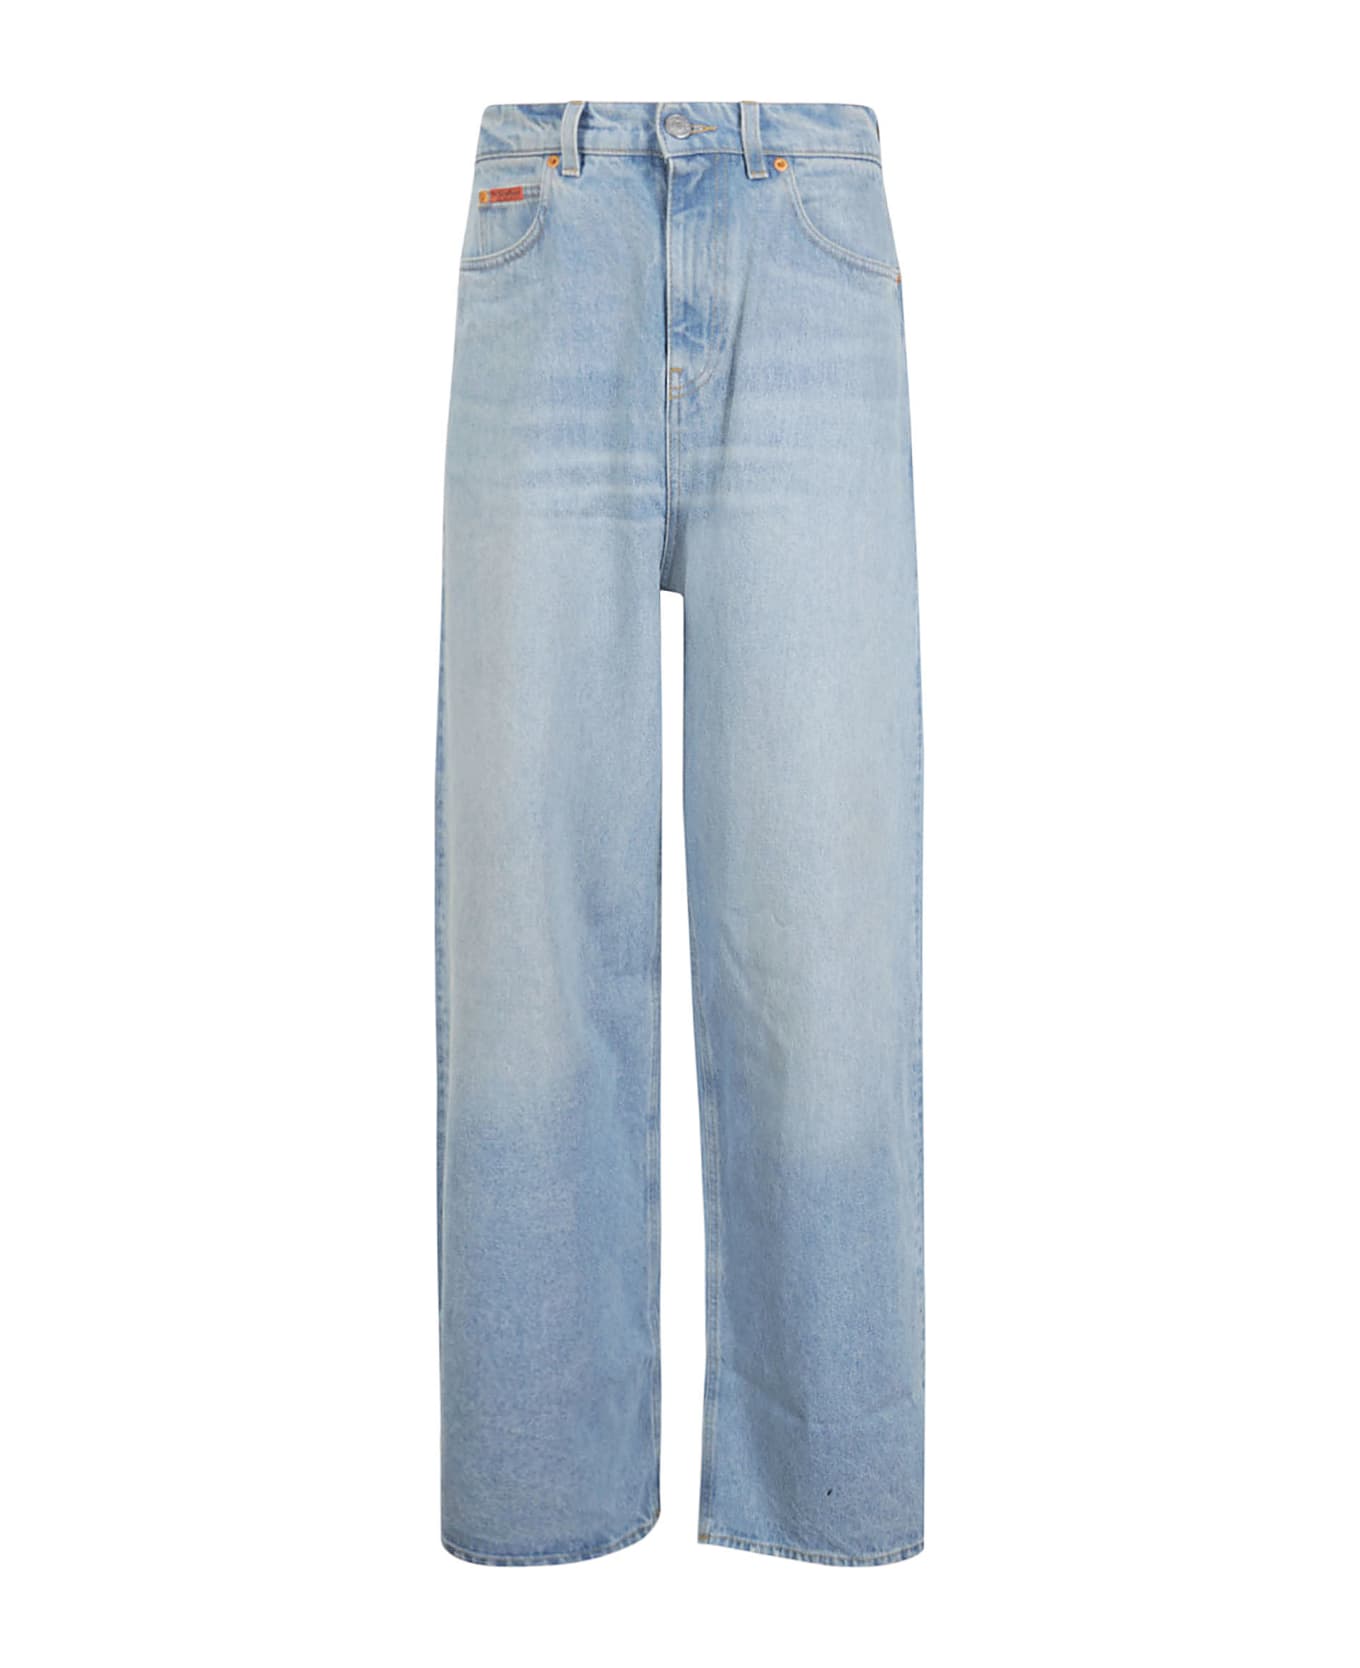 Martine Rose Extended Wide Leg Jean - BLEACHED WASH デニム